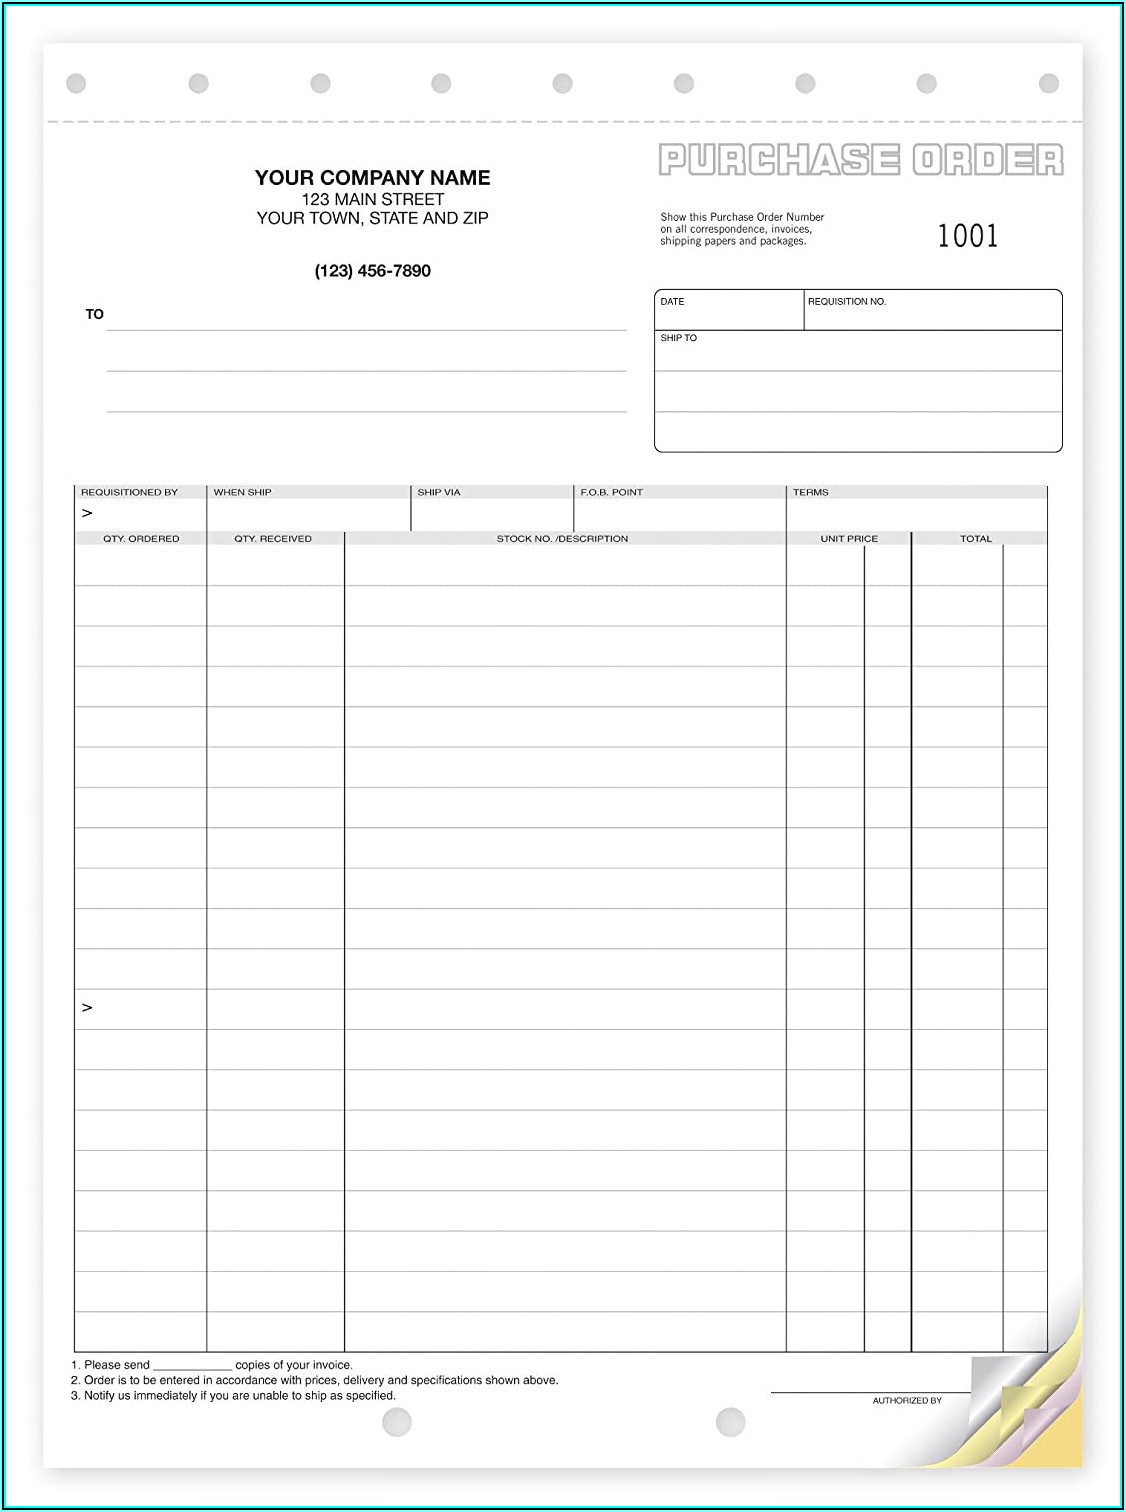 Custom Carbonless Purchase Order Forms